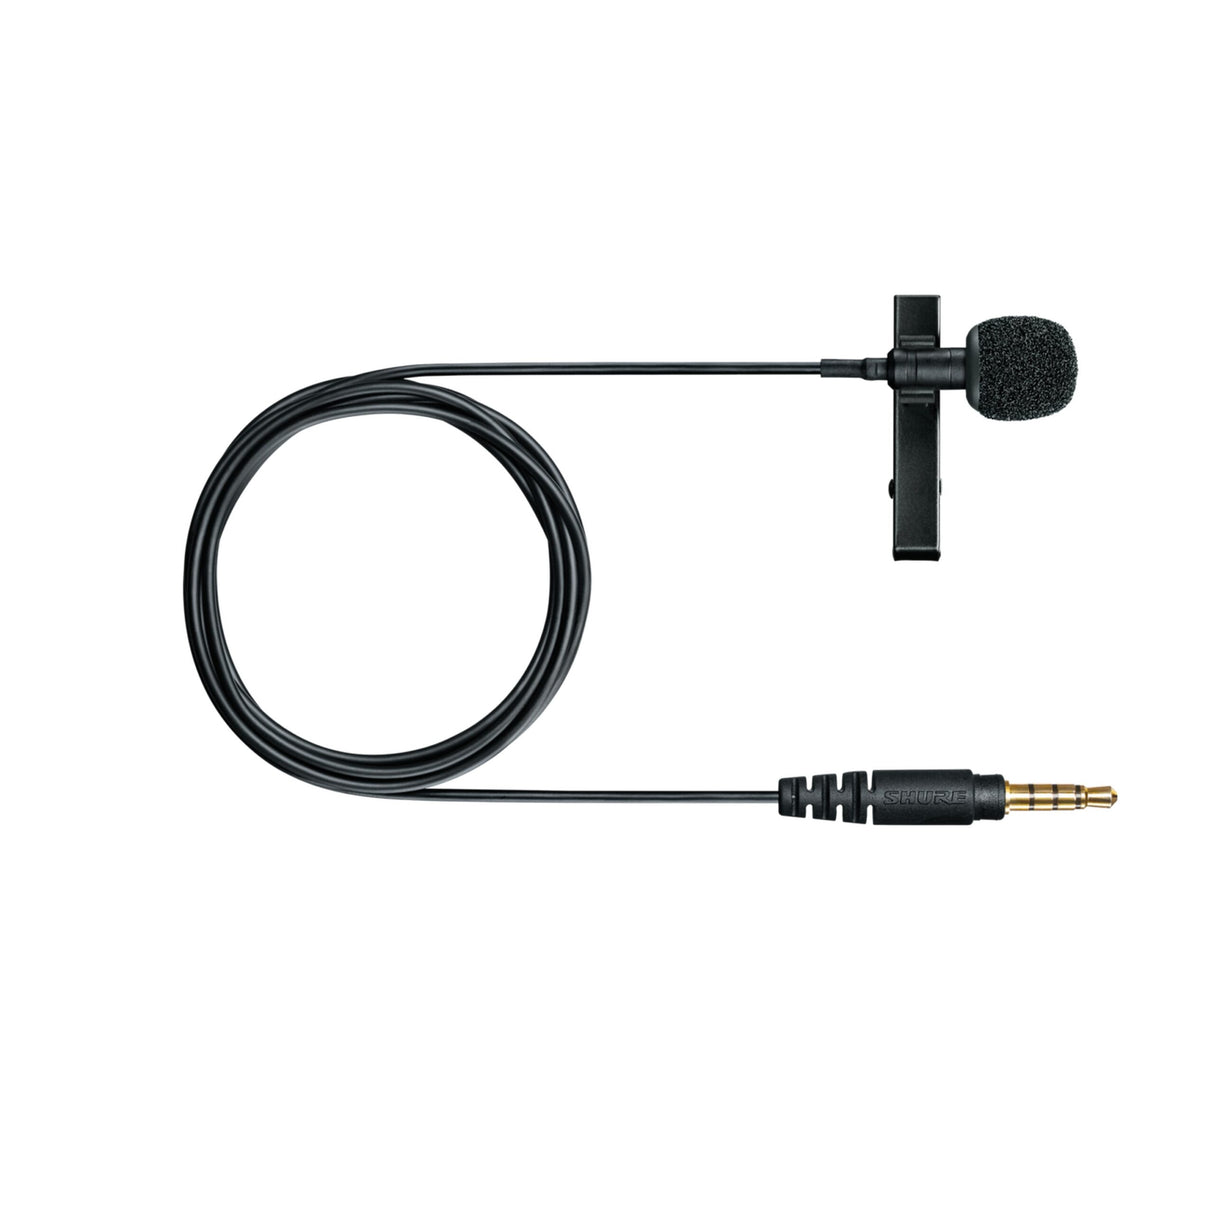 Shure MVL-3.5MM Lavalier Microphone for Smartphone or Tablet (Used)